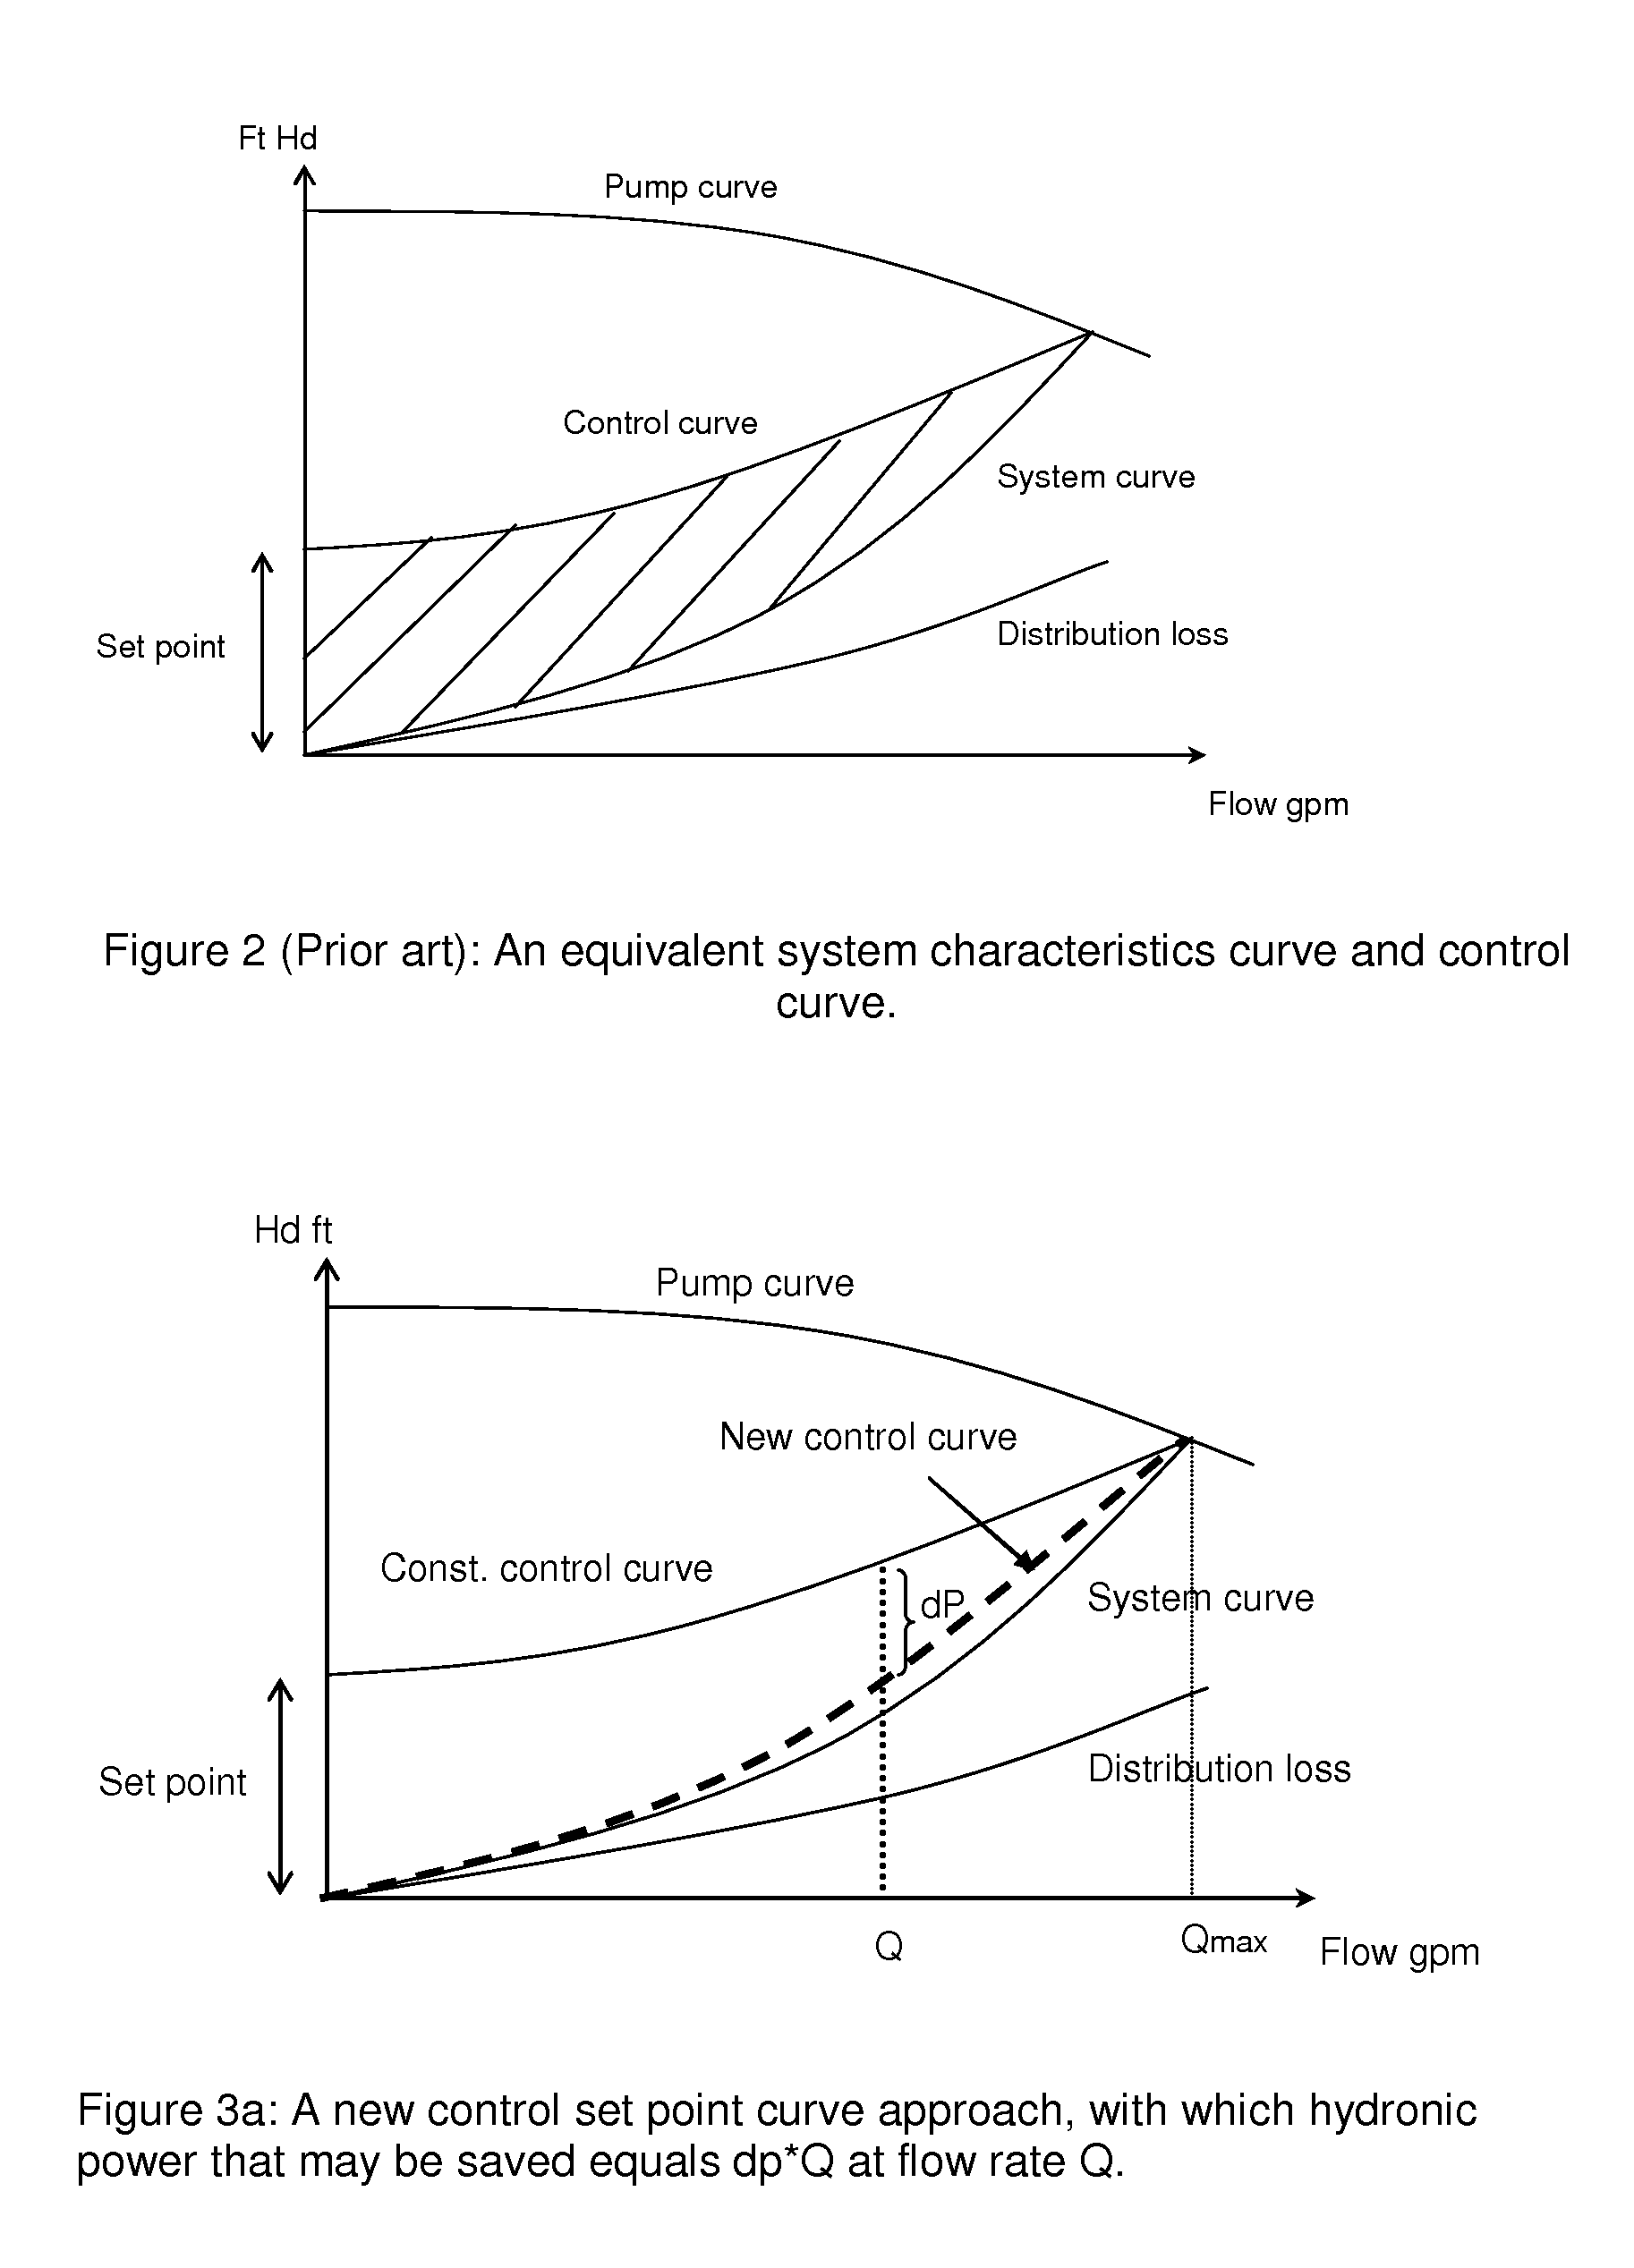 Method and apparatus for pump control using varying equivalent system characteristic curve, AKA an adaptive control curve